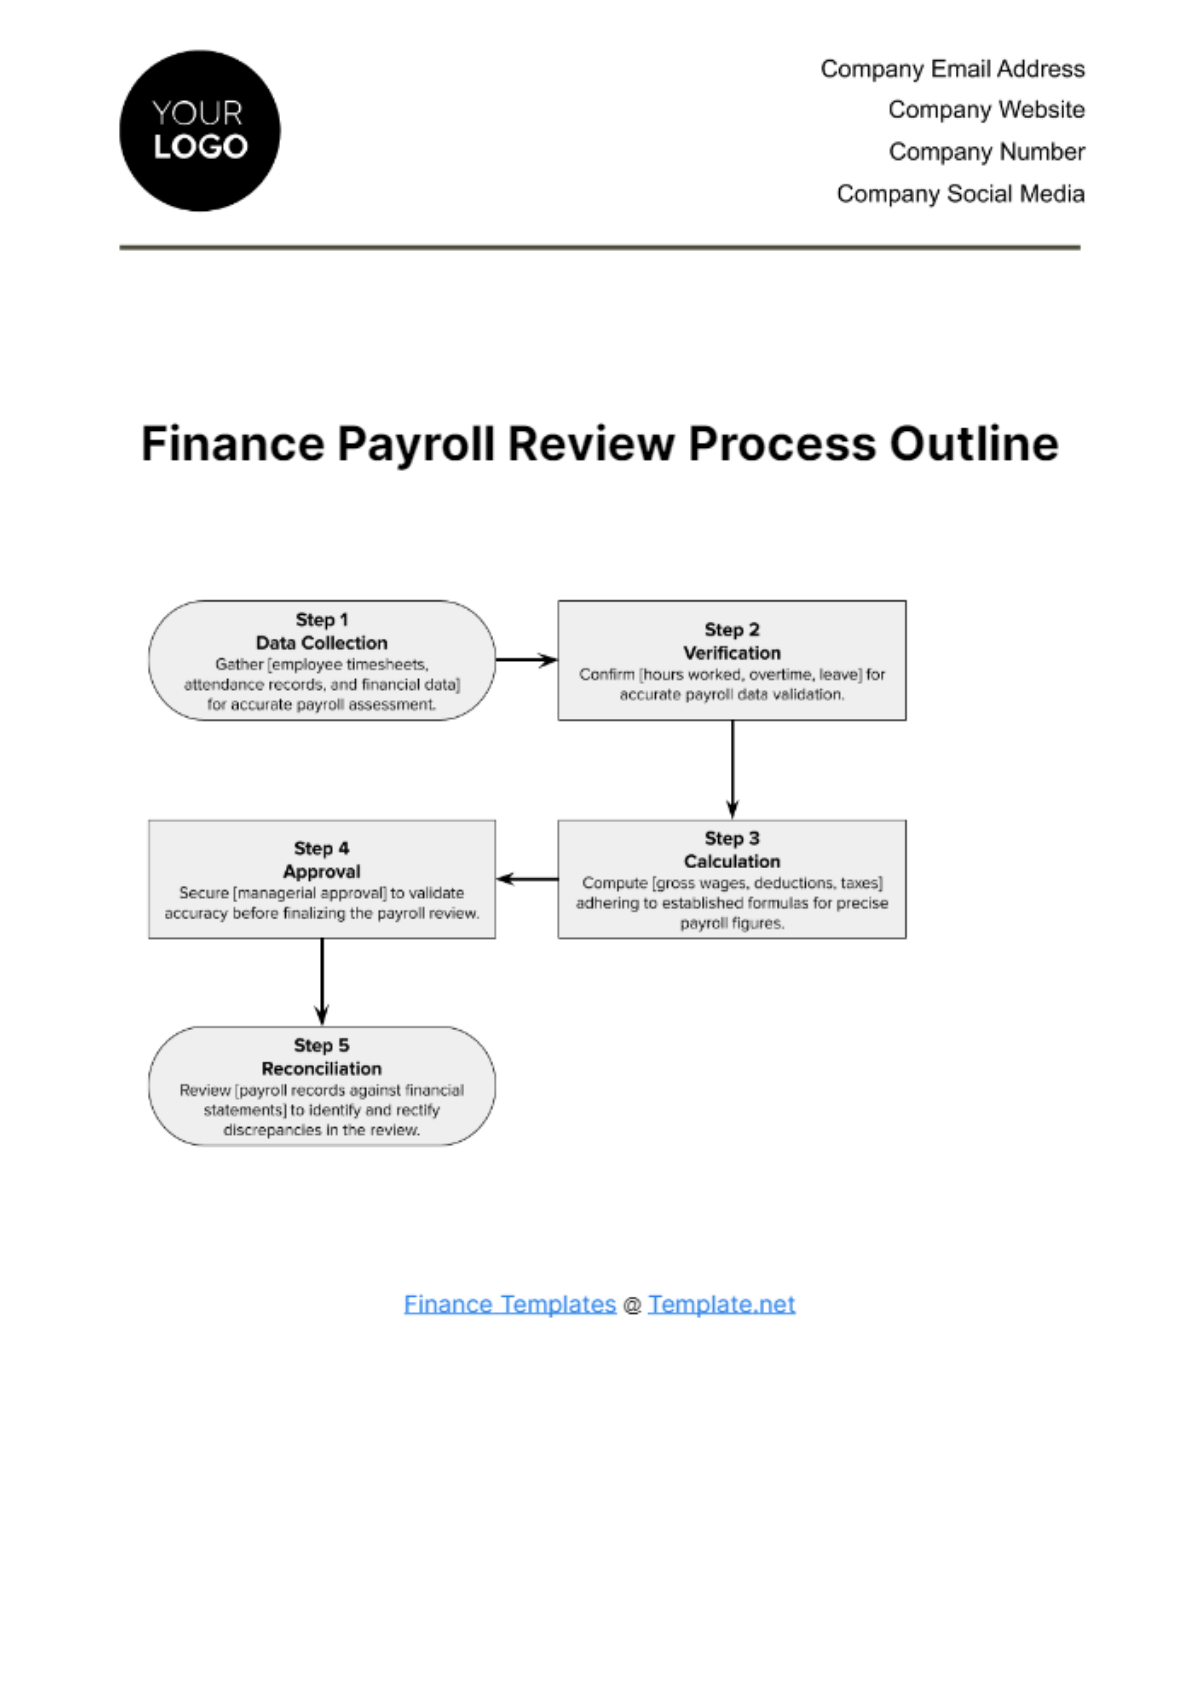 Free Finance Payroll Review Process Outline Template